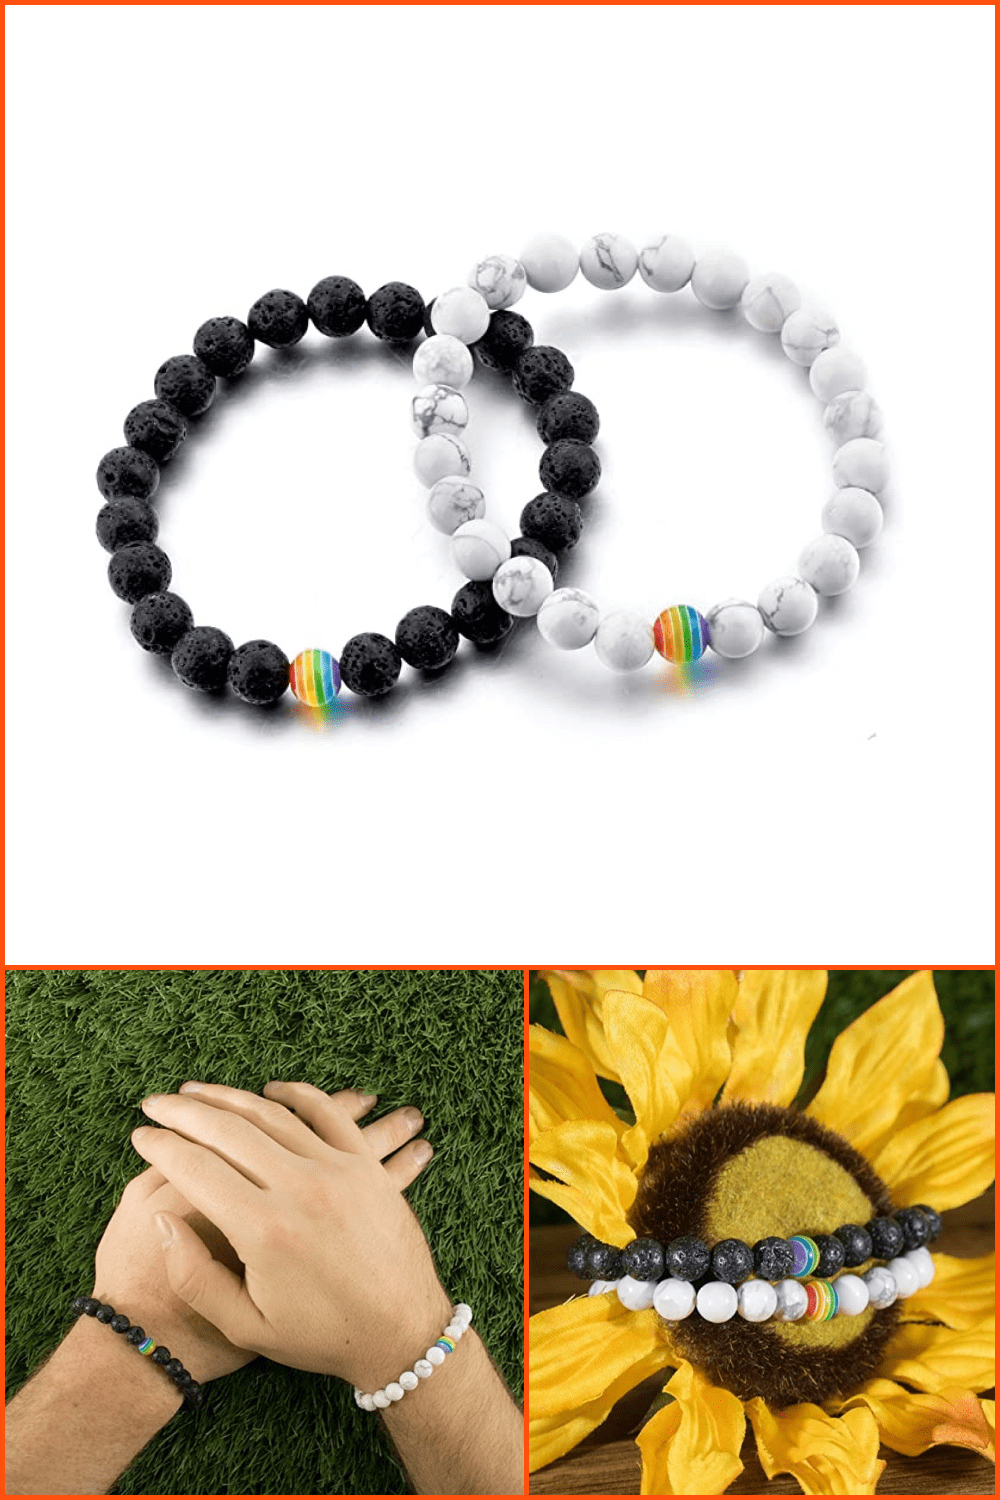 Black and white bracelets with one rainbow ball.